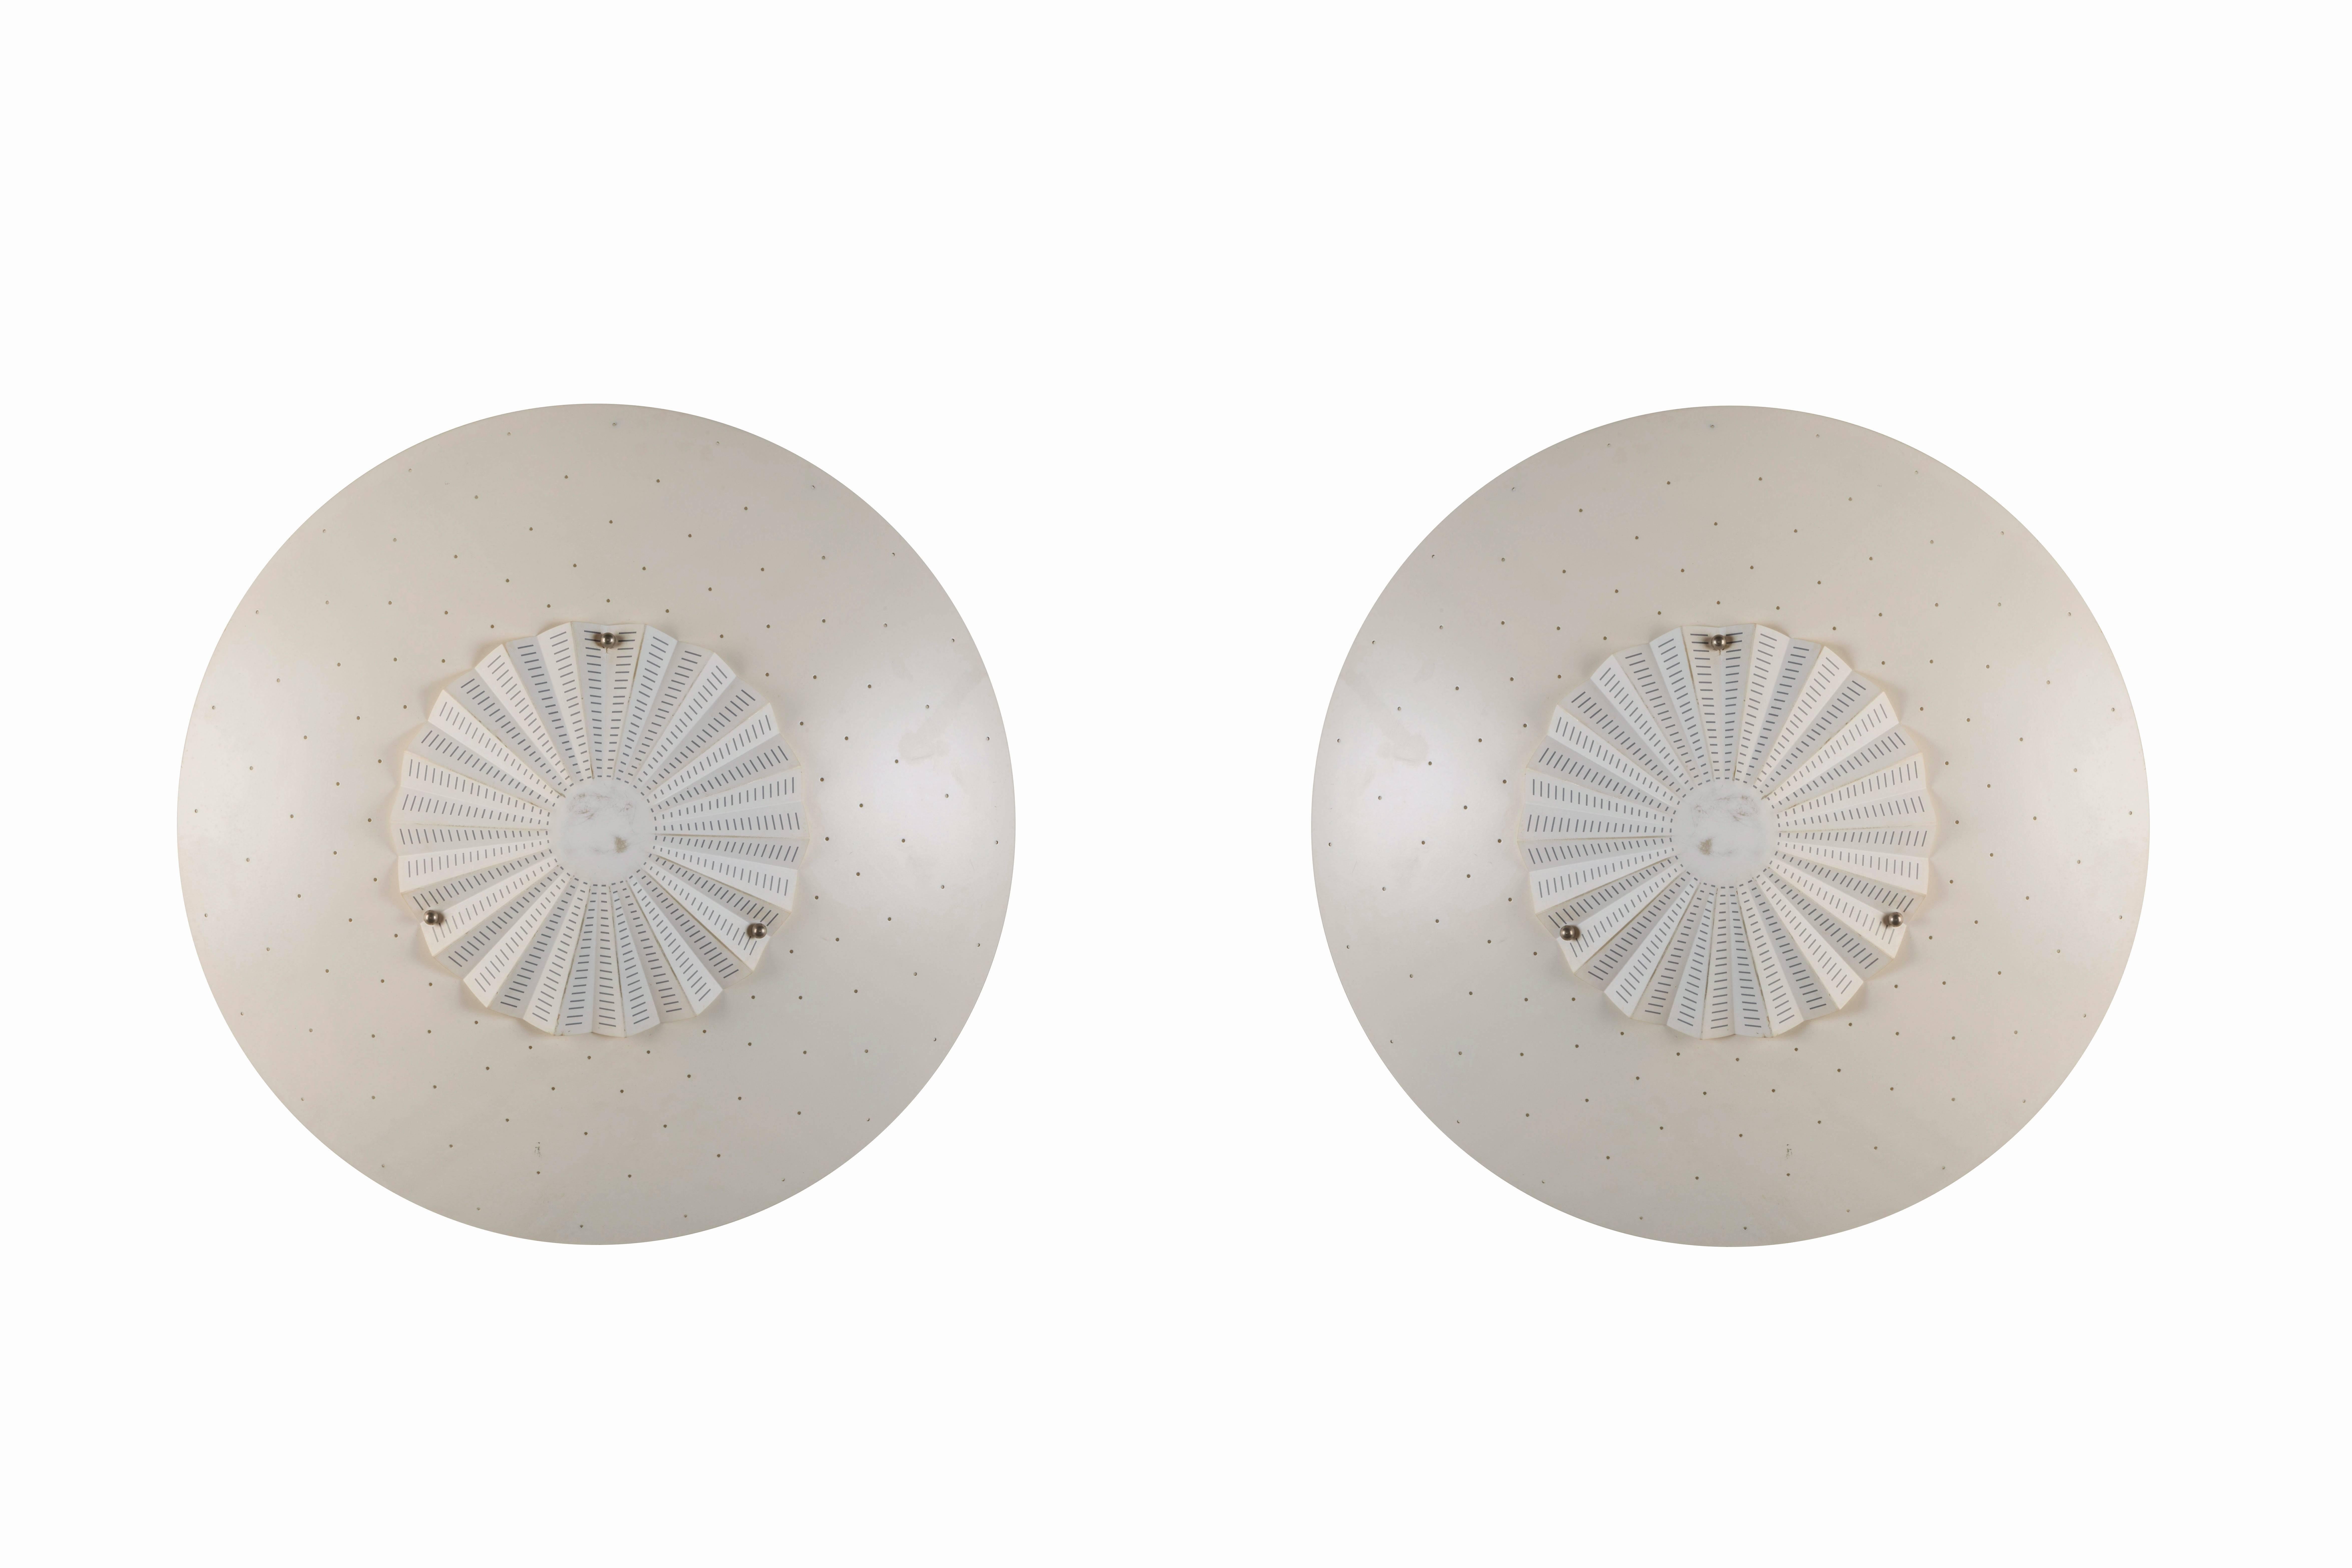 A pair of Oluce series "MIGALE" wall lights, designed in Italy, circa 1960s.
Lacquered aluminium, varnished steel, and polycarbonate. Sold and priced individually. Retains original manufacturer’s label "Oluce serie MIGALE".